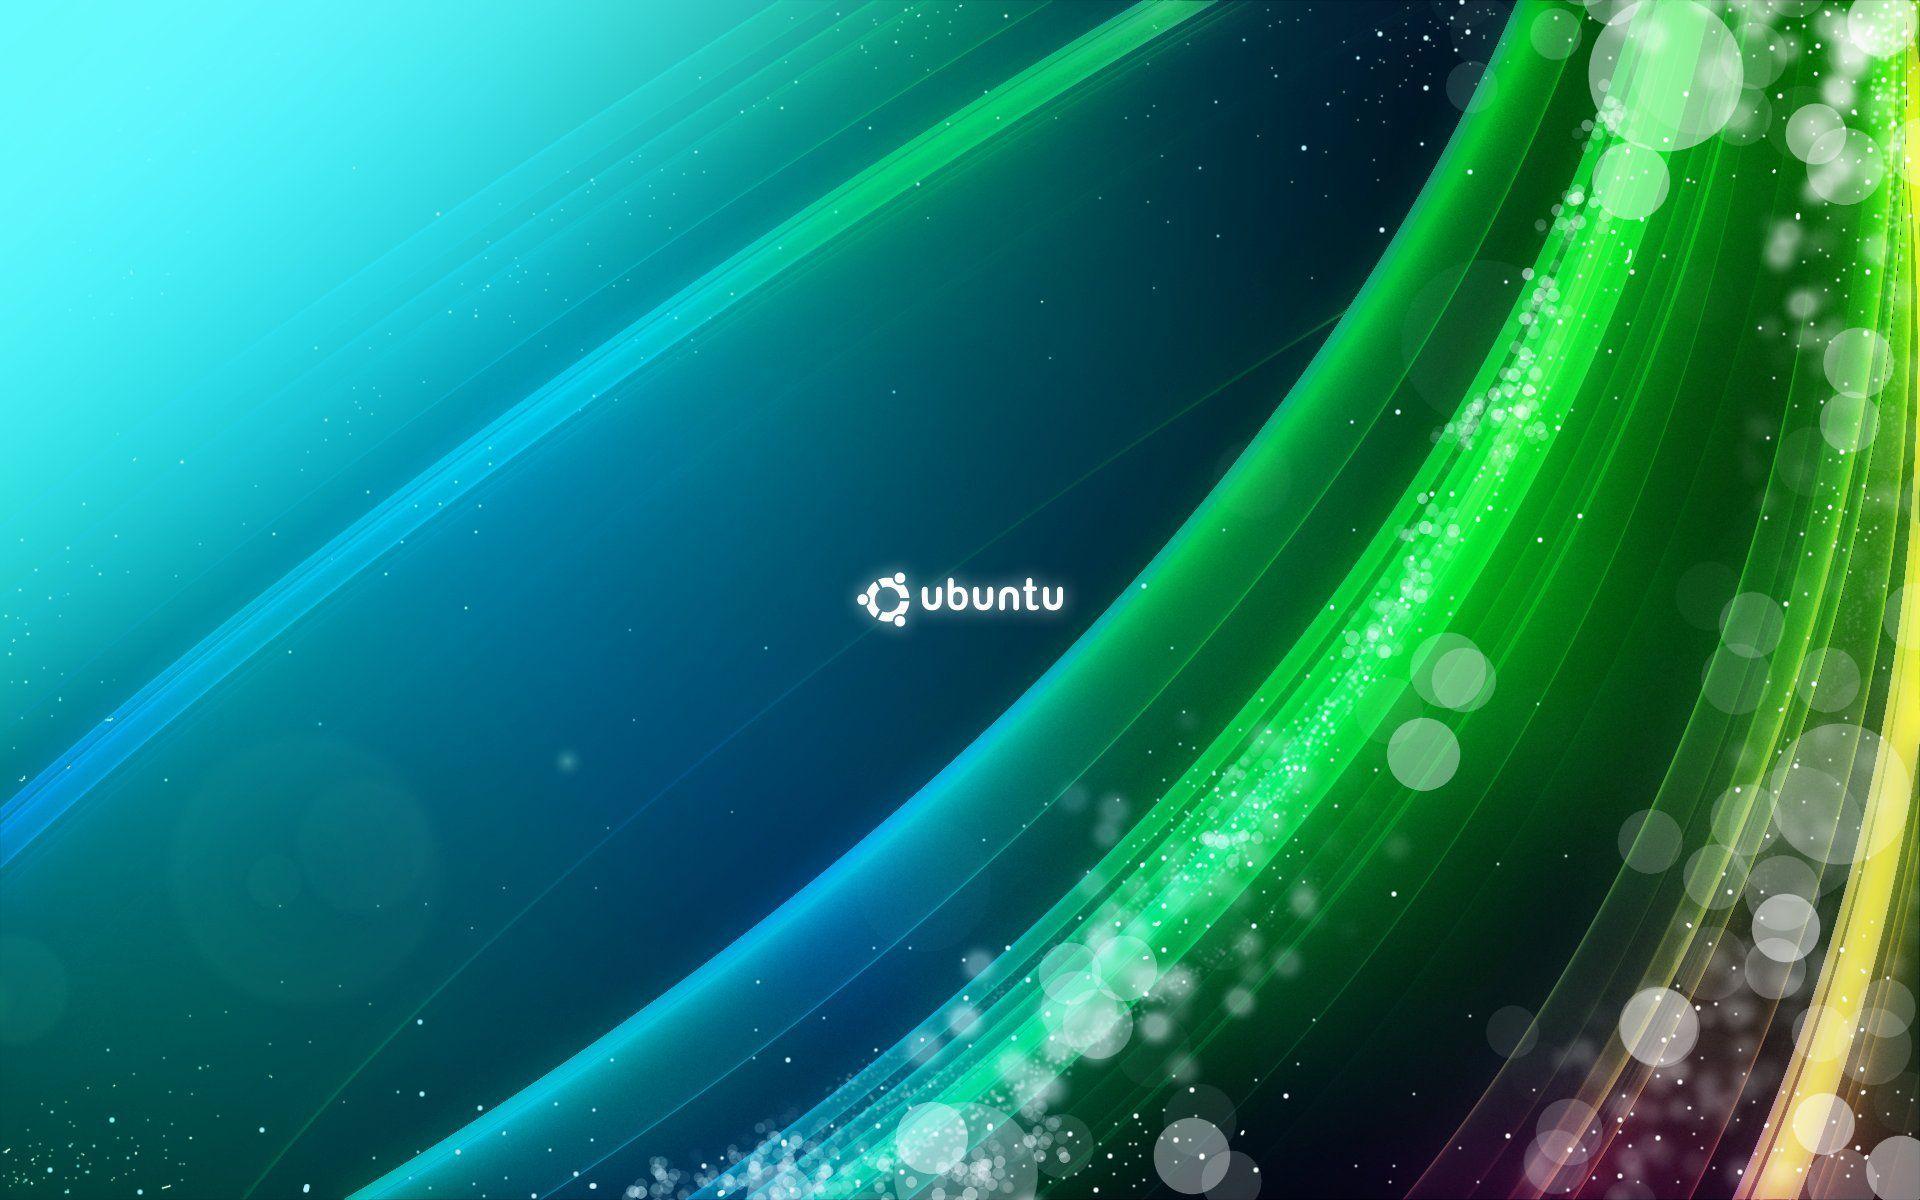 Cool Linux Wallpaper to Decorate Your Desktop